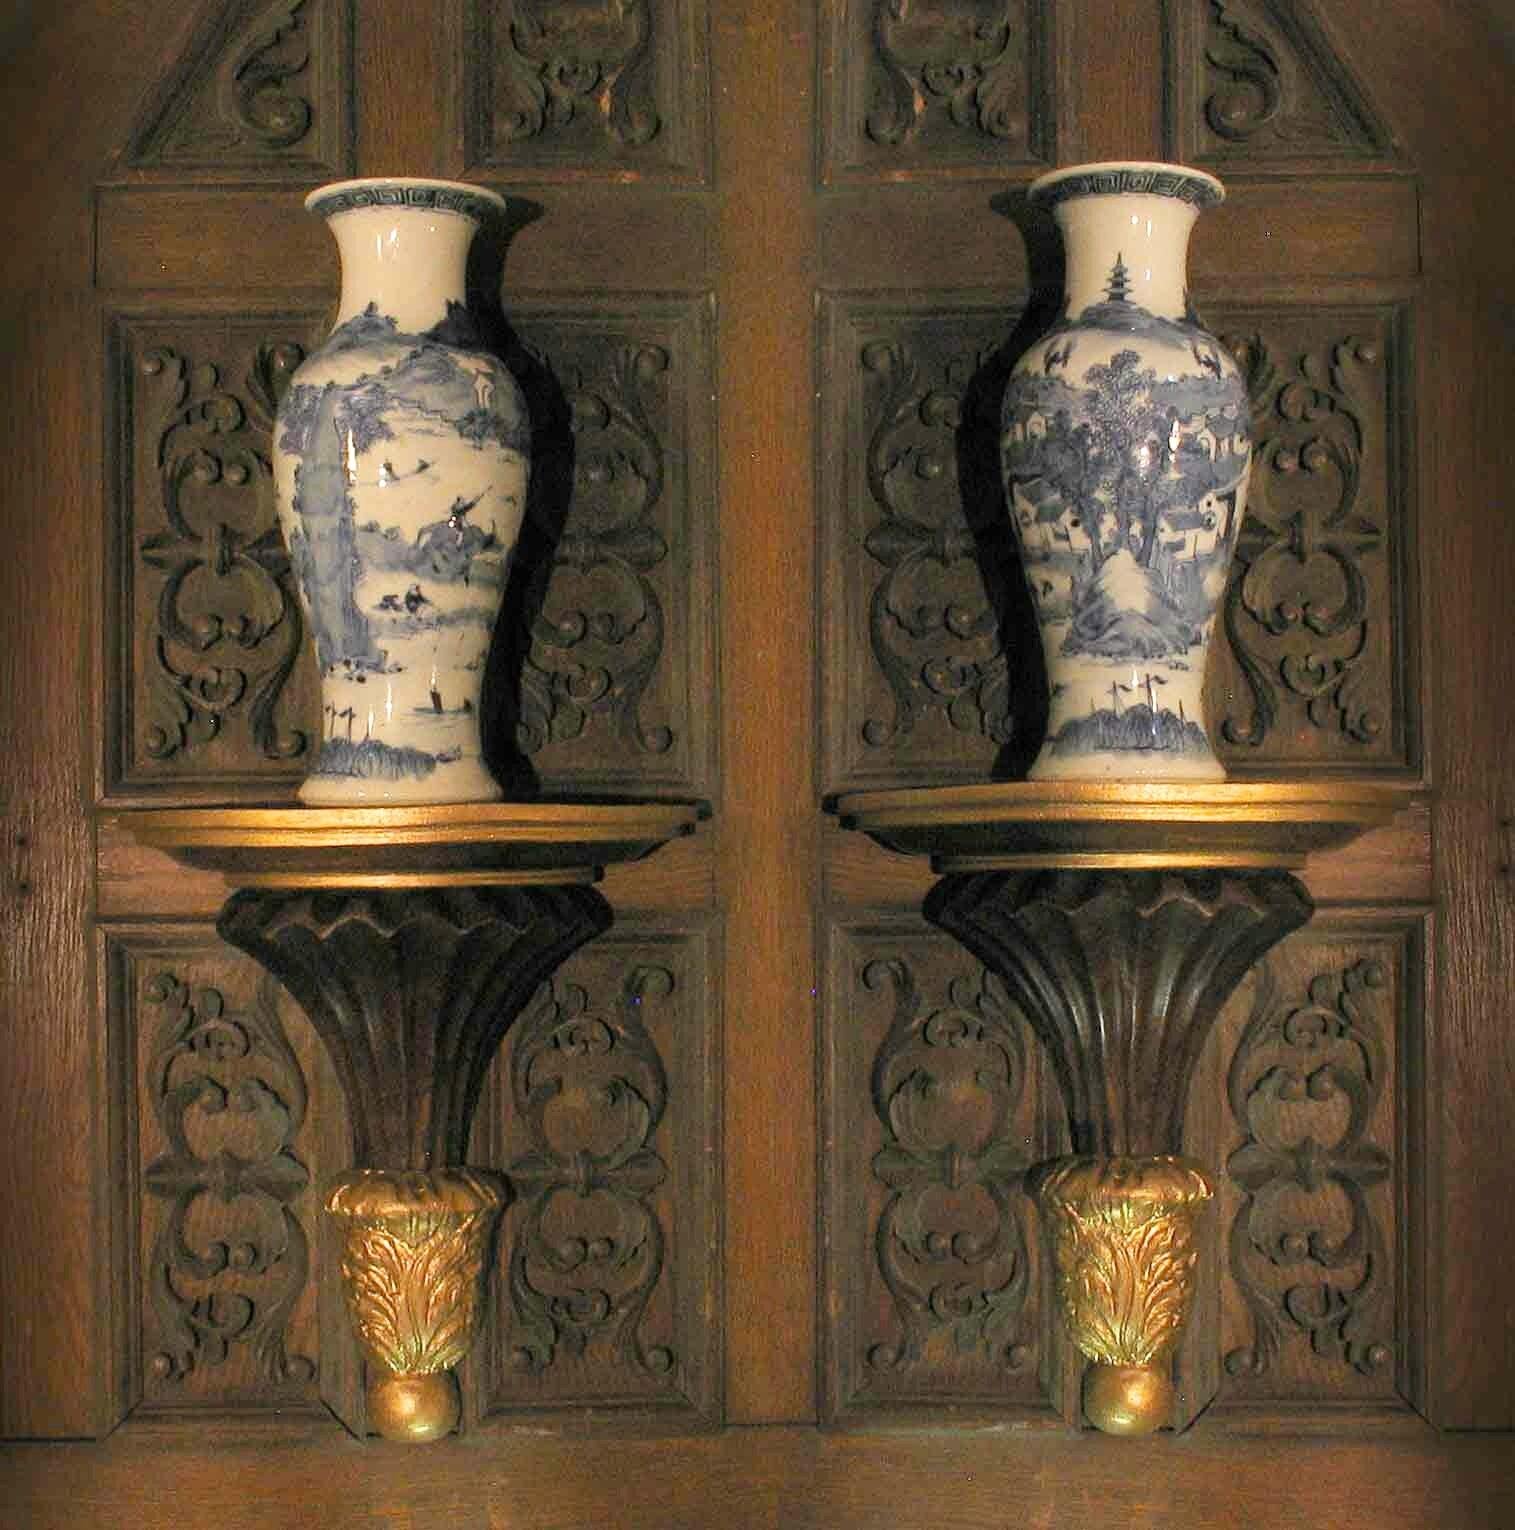 A pair of neoclassical style parcel gilt carved wood wall brackets, 20th century. The wall brackets have a semi-circular platform above a reeded, tapering support, descending to a terminal with acanthus leaves carved in relief. The brackets measure